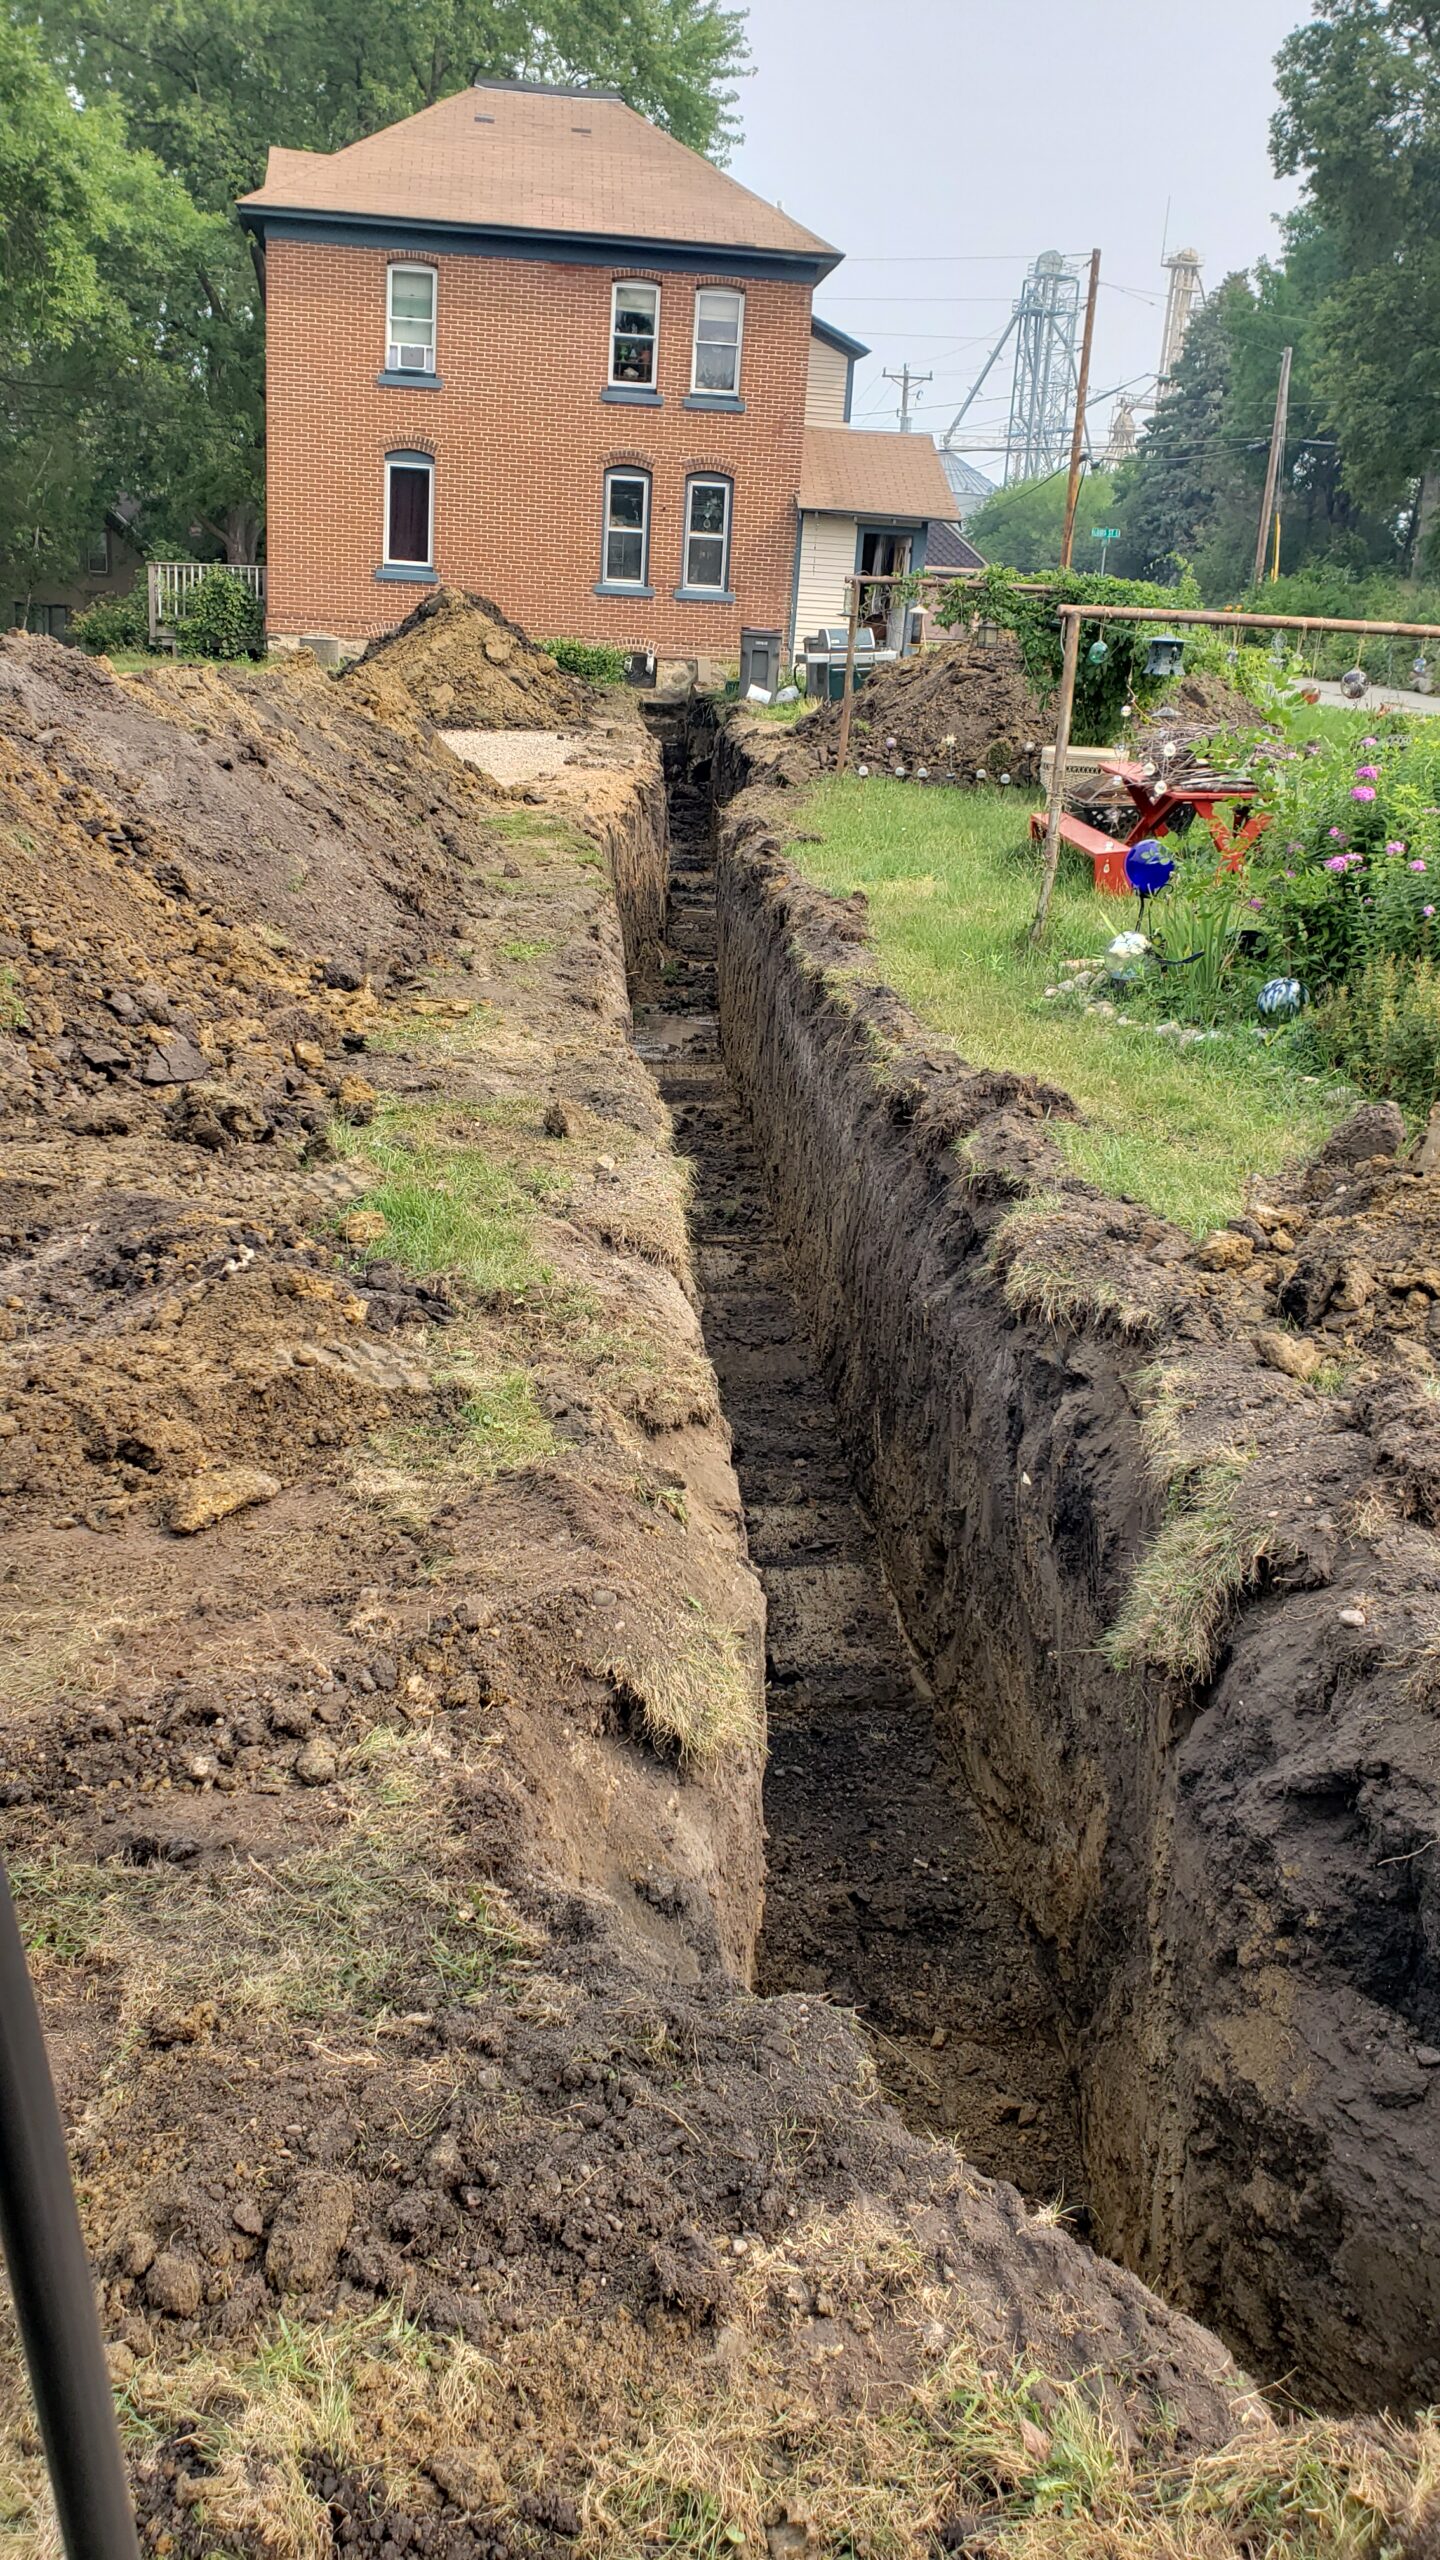 Trenching and hole digging services for new construction, remodels and repair of commercial and residential properties from Voehl Construction Inc.